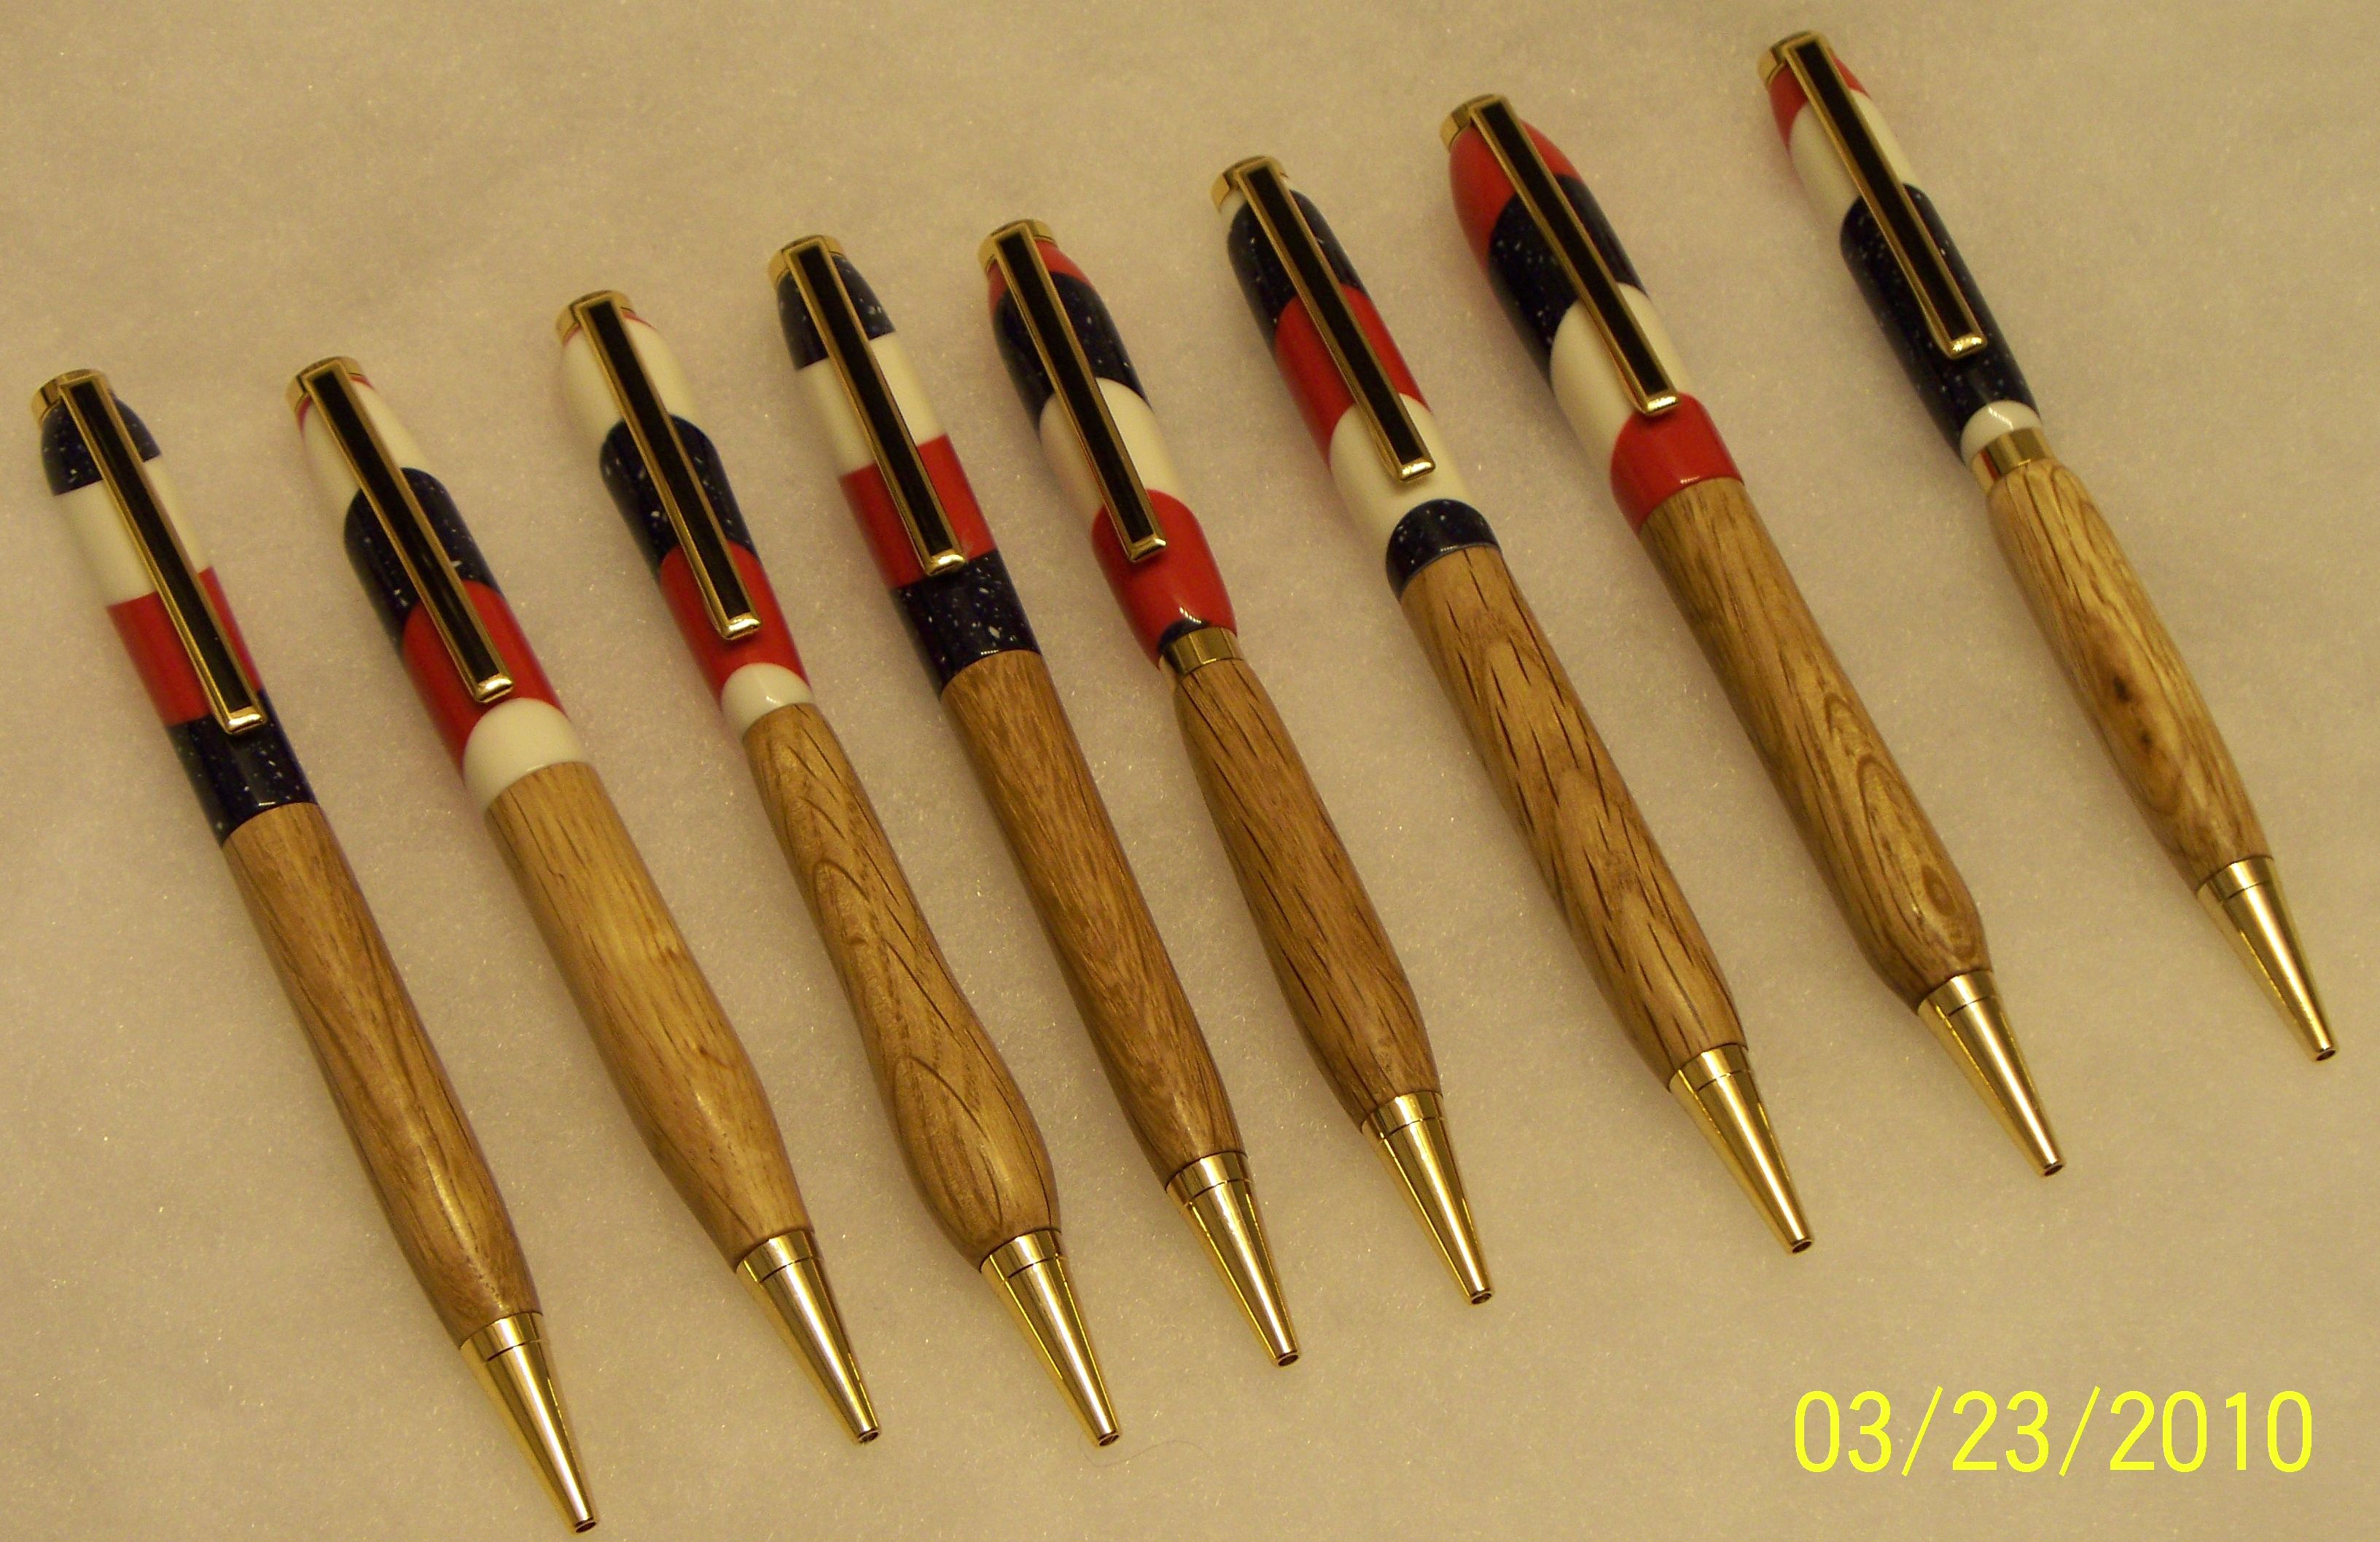  Pen Turning Pictures troops8.jpg for Turning Round 